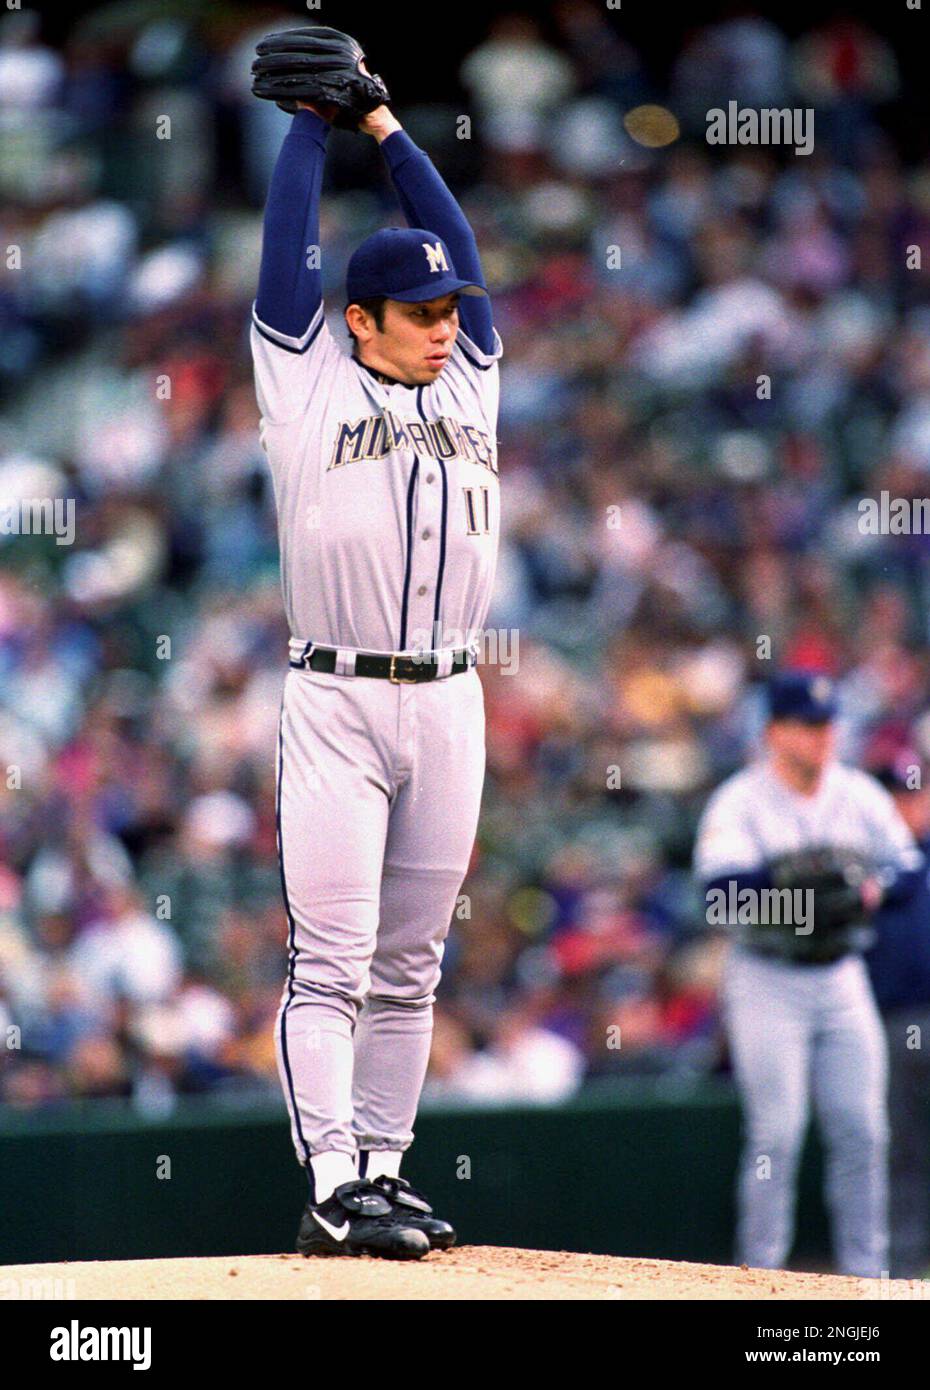 Milwaukee Brewers starting pitcher Hideo Nomo goes into his windup to  deliver a pitch to Colorado Rockies leadoff hitter Darryl Hamilton in the  first inning in Denver's Coors Field Saturday, June 5